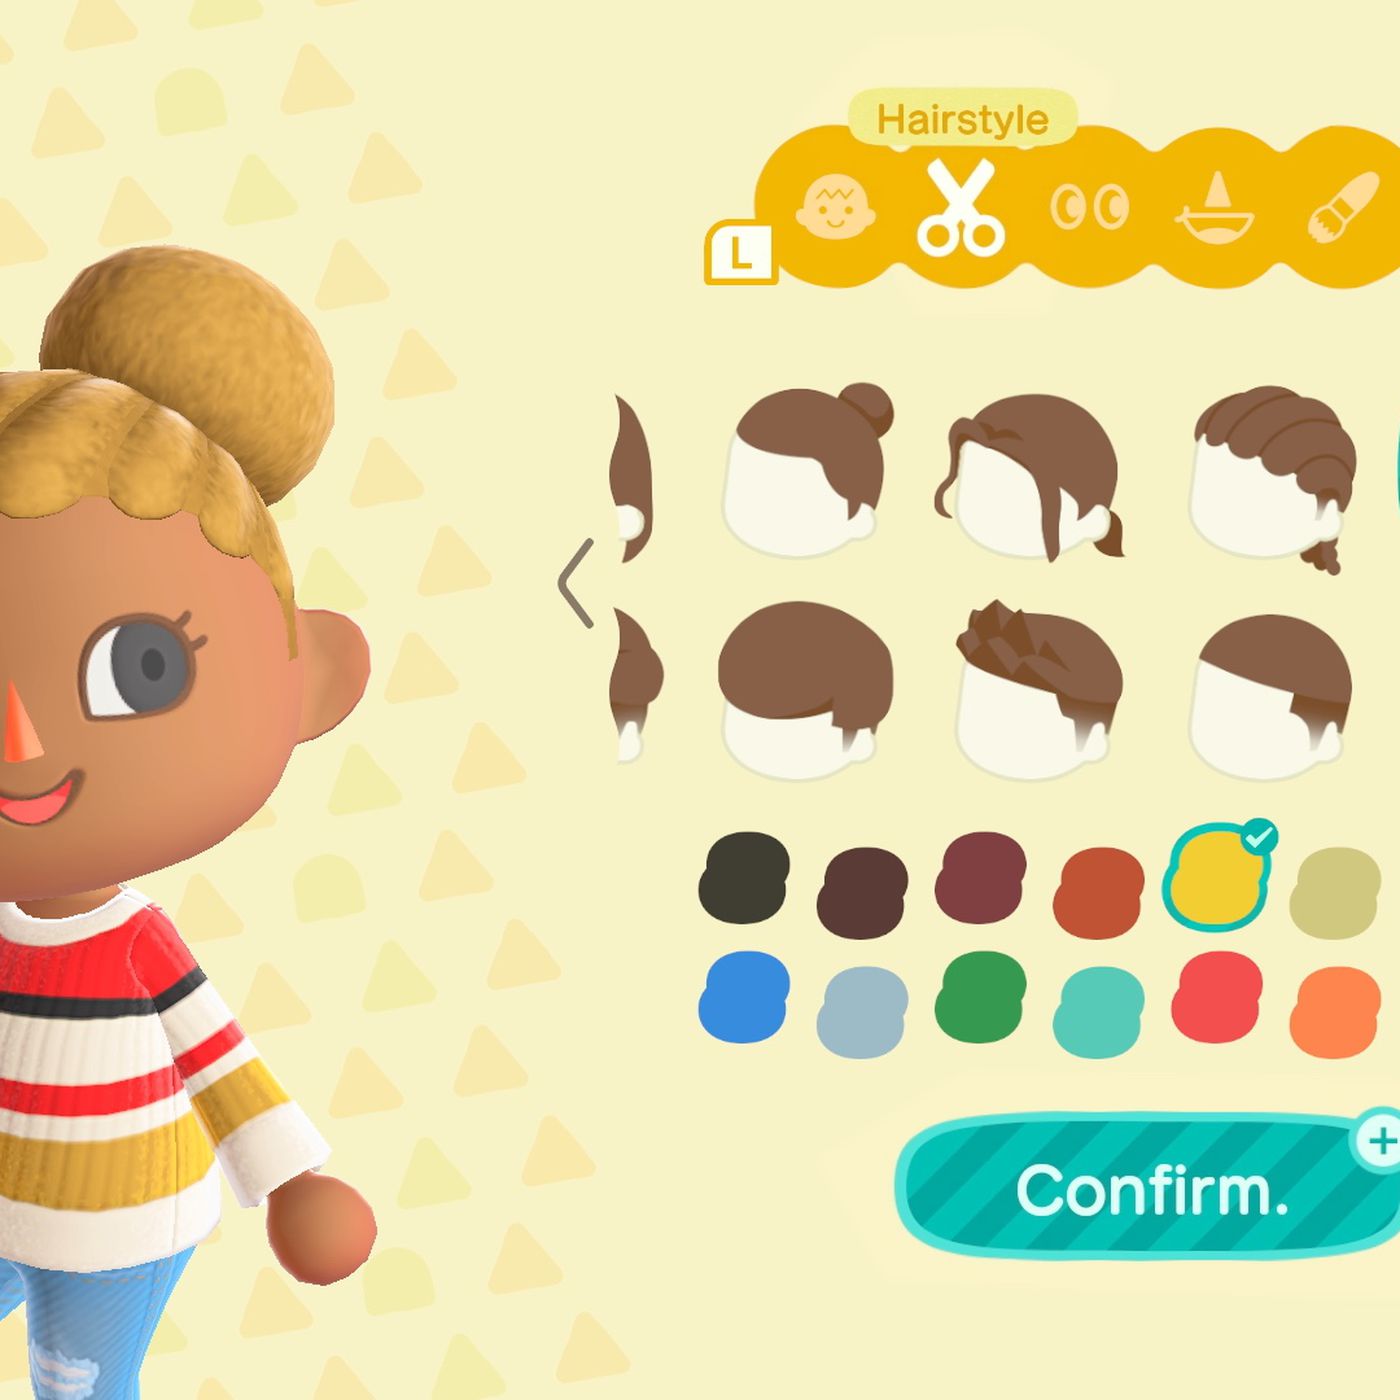 Animal Crossing's 'space buns' hair controversy erases Black fans - Polygon